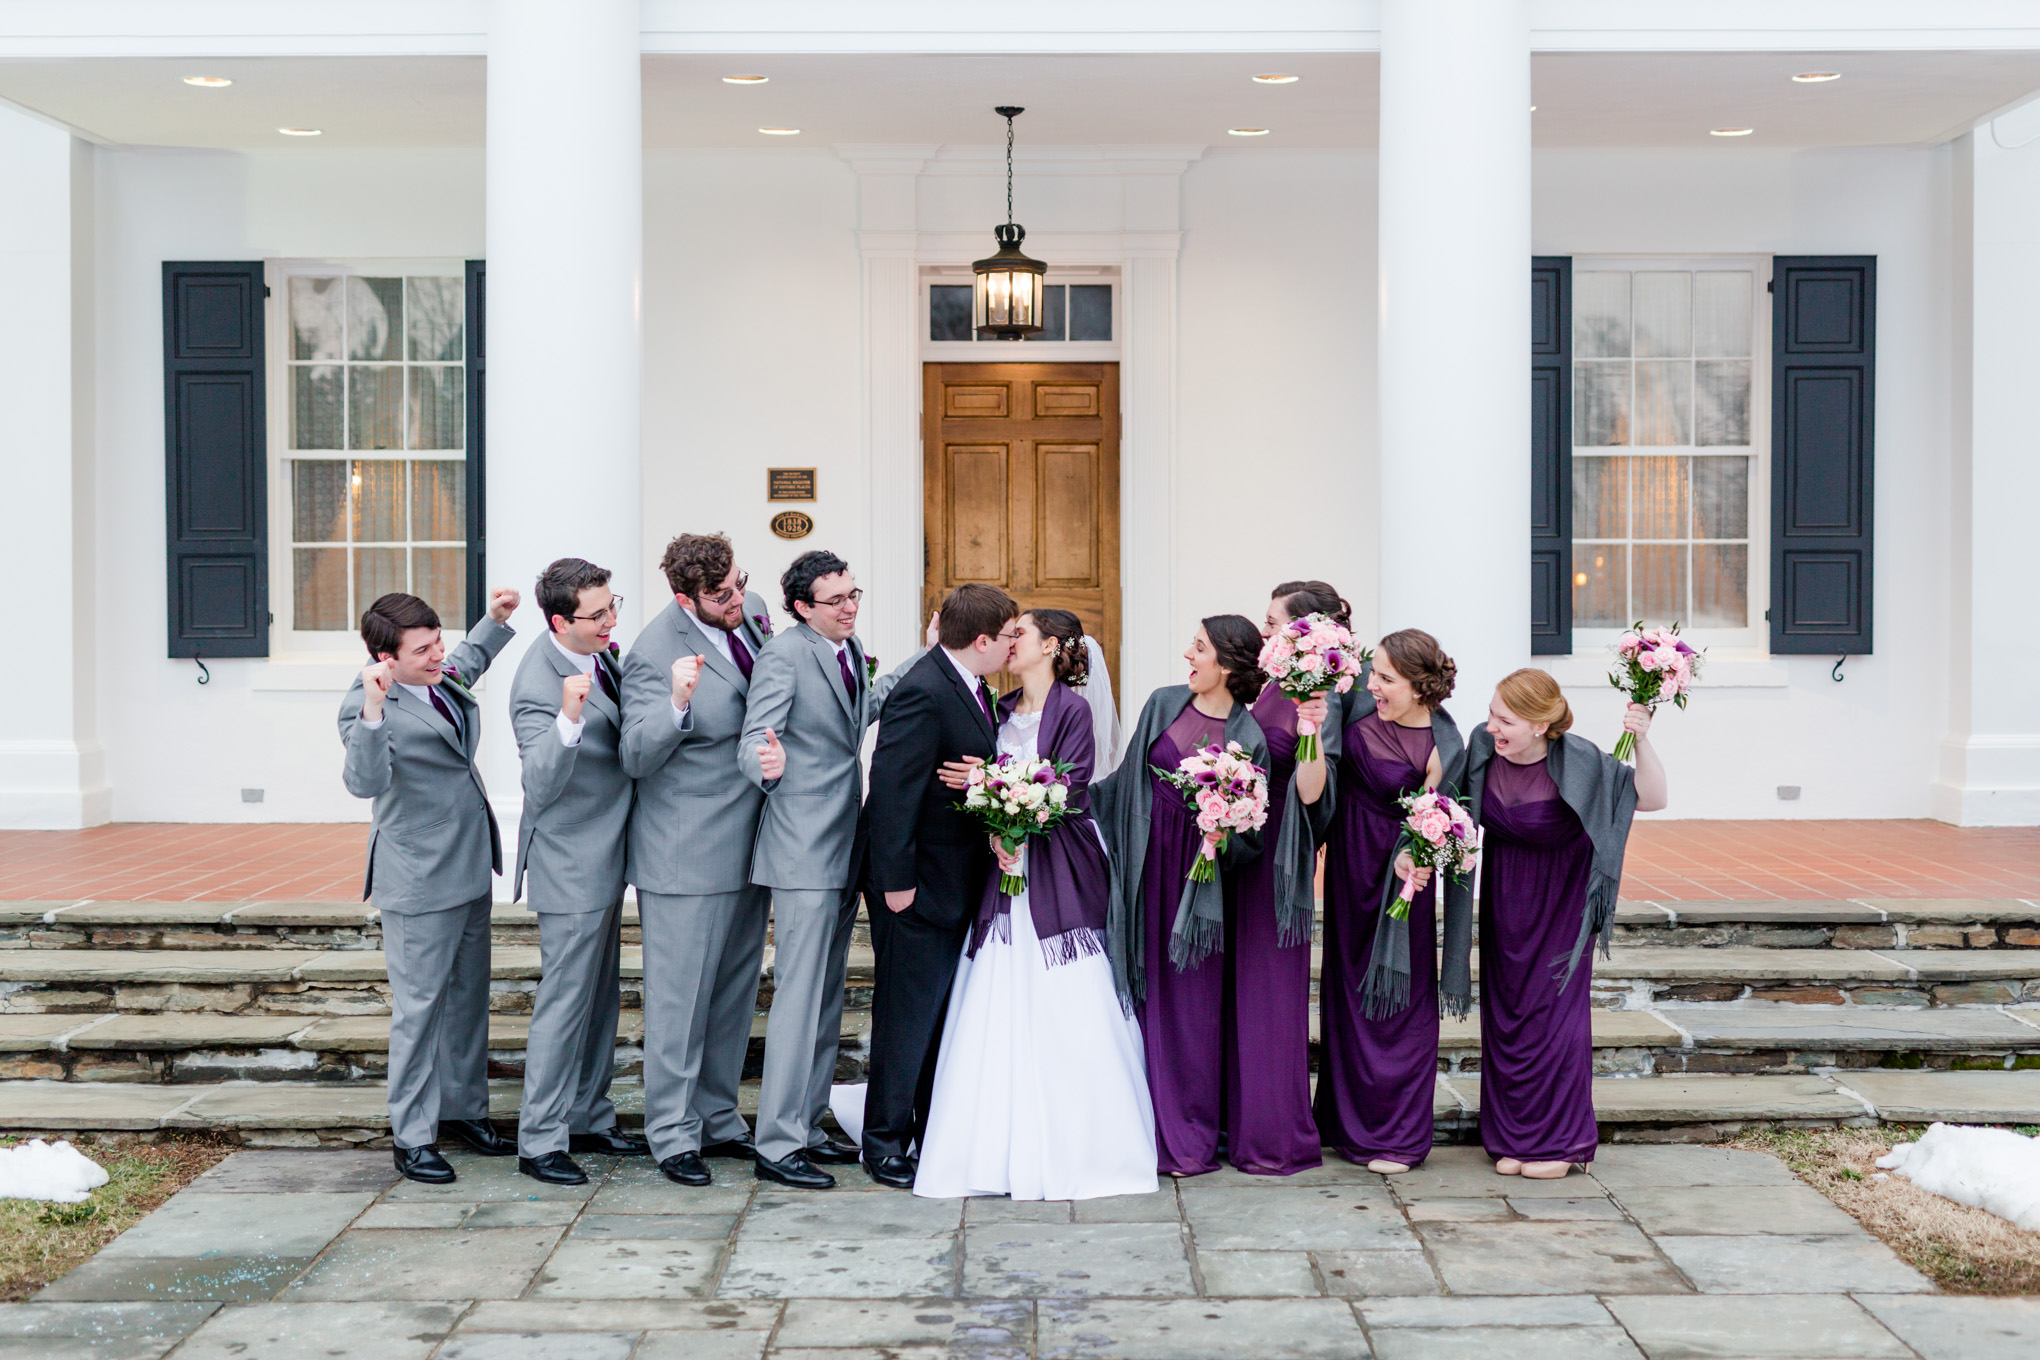 classic winter wedding in Maryland, winter wedding, classic winter wedding, classic wedding, elegant couple, purple aesthetic, church wedding, Maryland wedding, Rachel E.H. Photography, Maryland wedding photographer, natural light portraits, couple goals, relationship goals, classic wedding dress, winter white wedding, DC wedding photographer, wedding party portraits, grey and purple aesthetic, Glenview Mansion